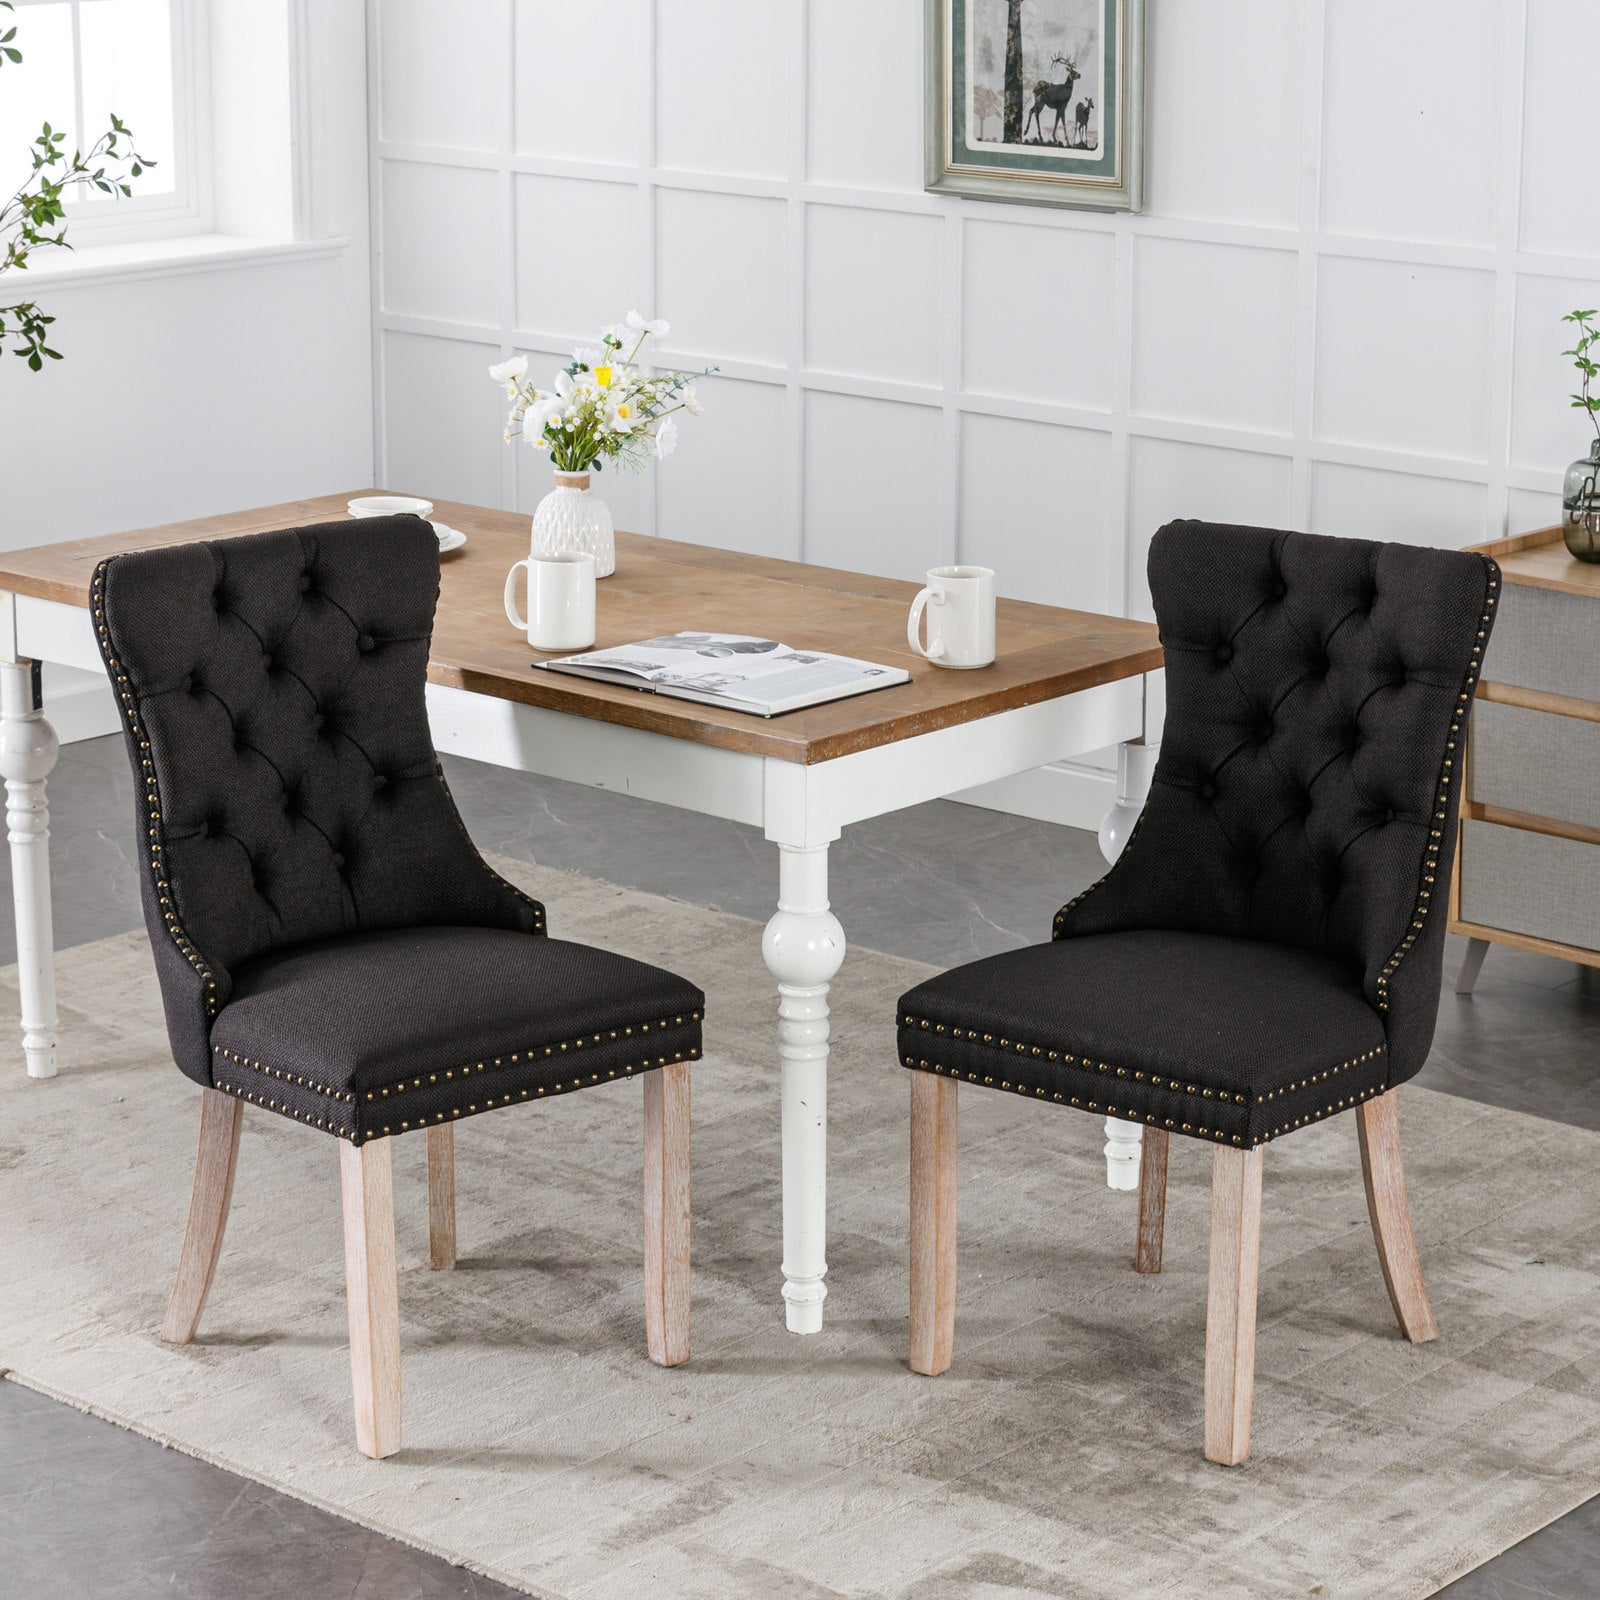 Set of 2 - High-end Tufted Solid Wood Contemporary Flax Upholstered Linen Dining Chair with Wood Legs Nailhead Trim - Black Linen